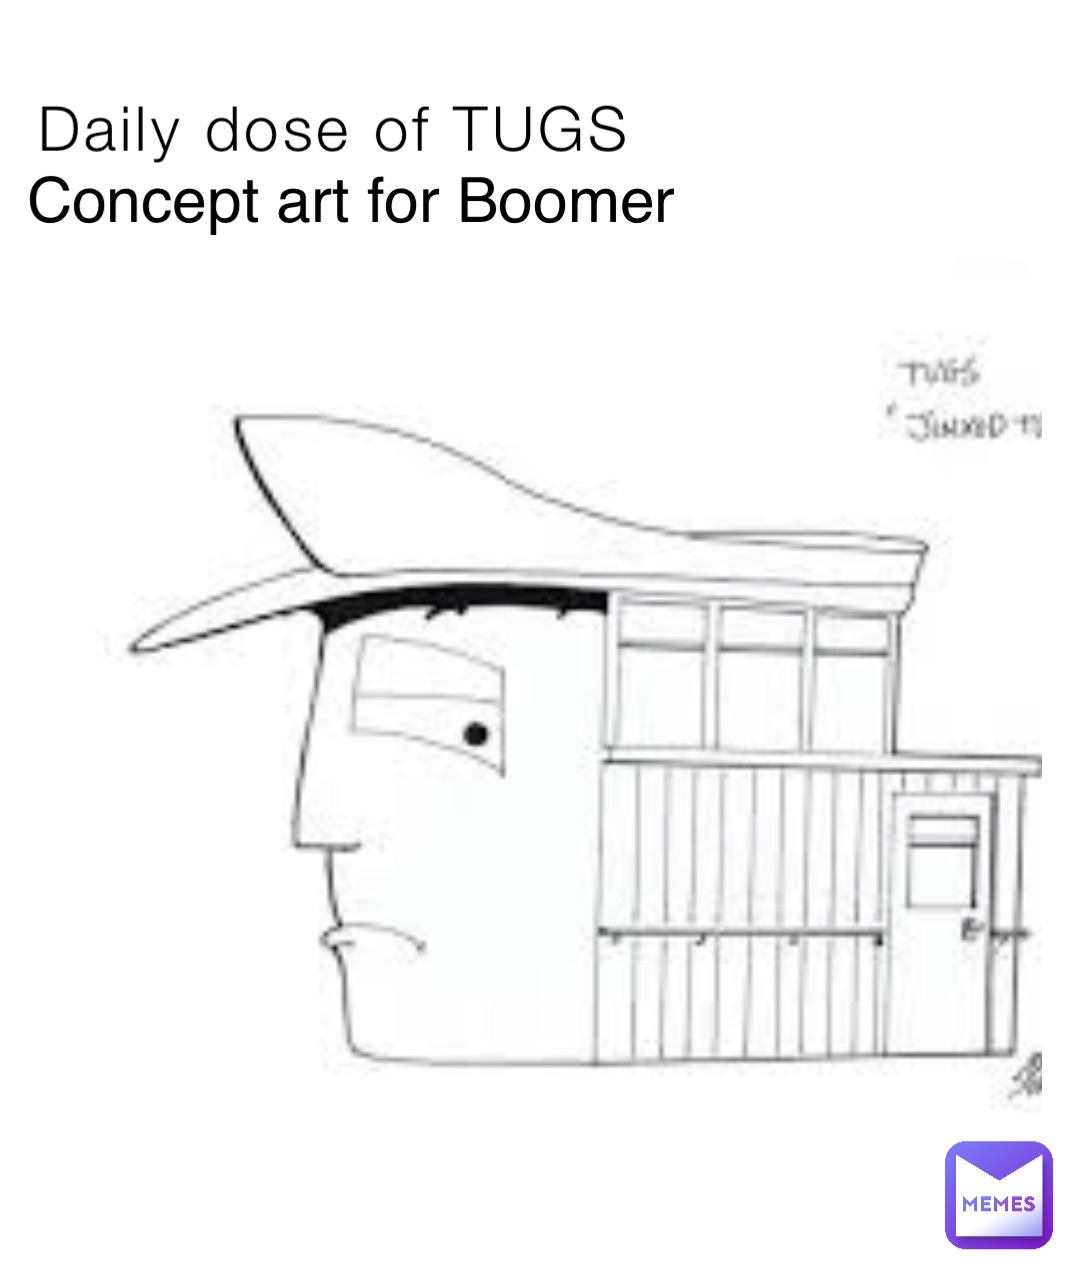 Daily dose of TUGS Concept art for Boomer